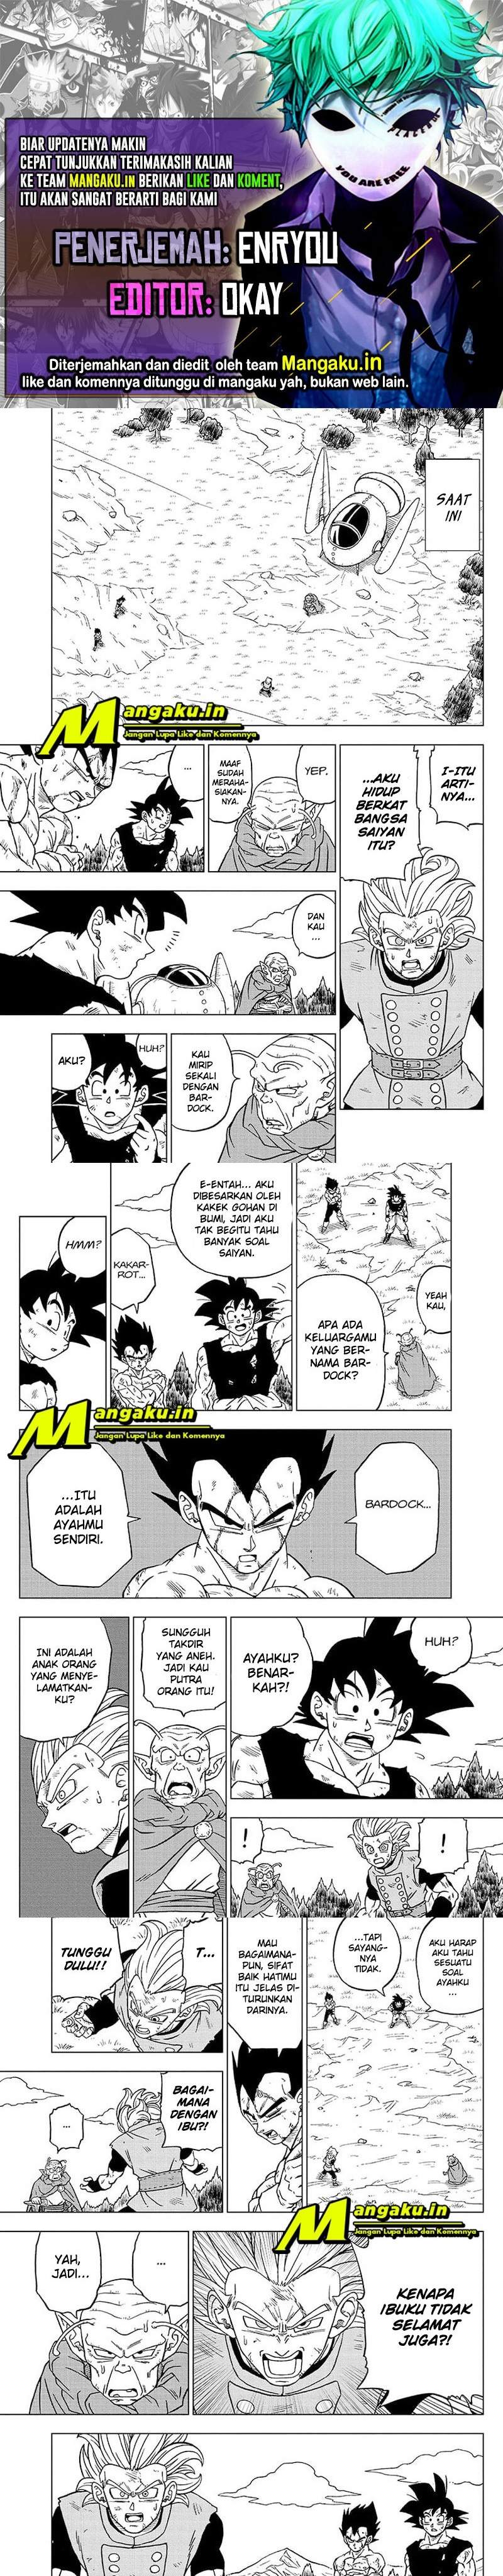 Dragon Ball Super: Chapter 77.2 - Page 1